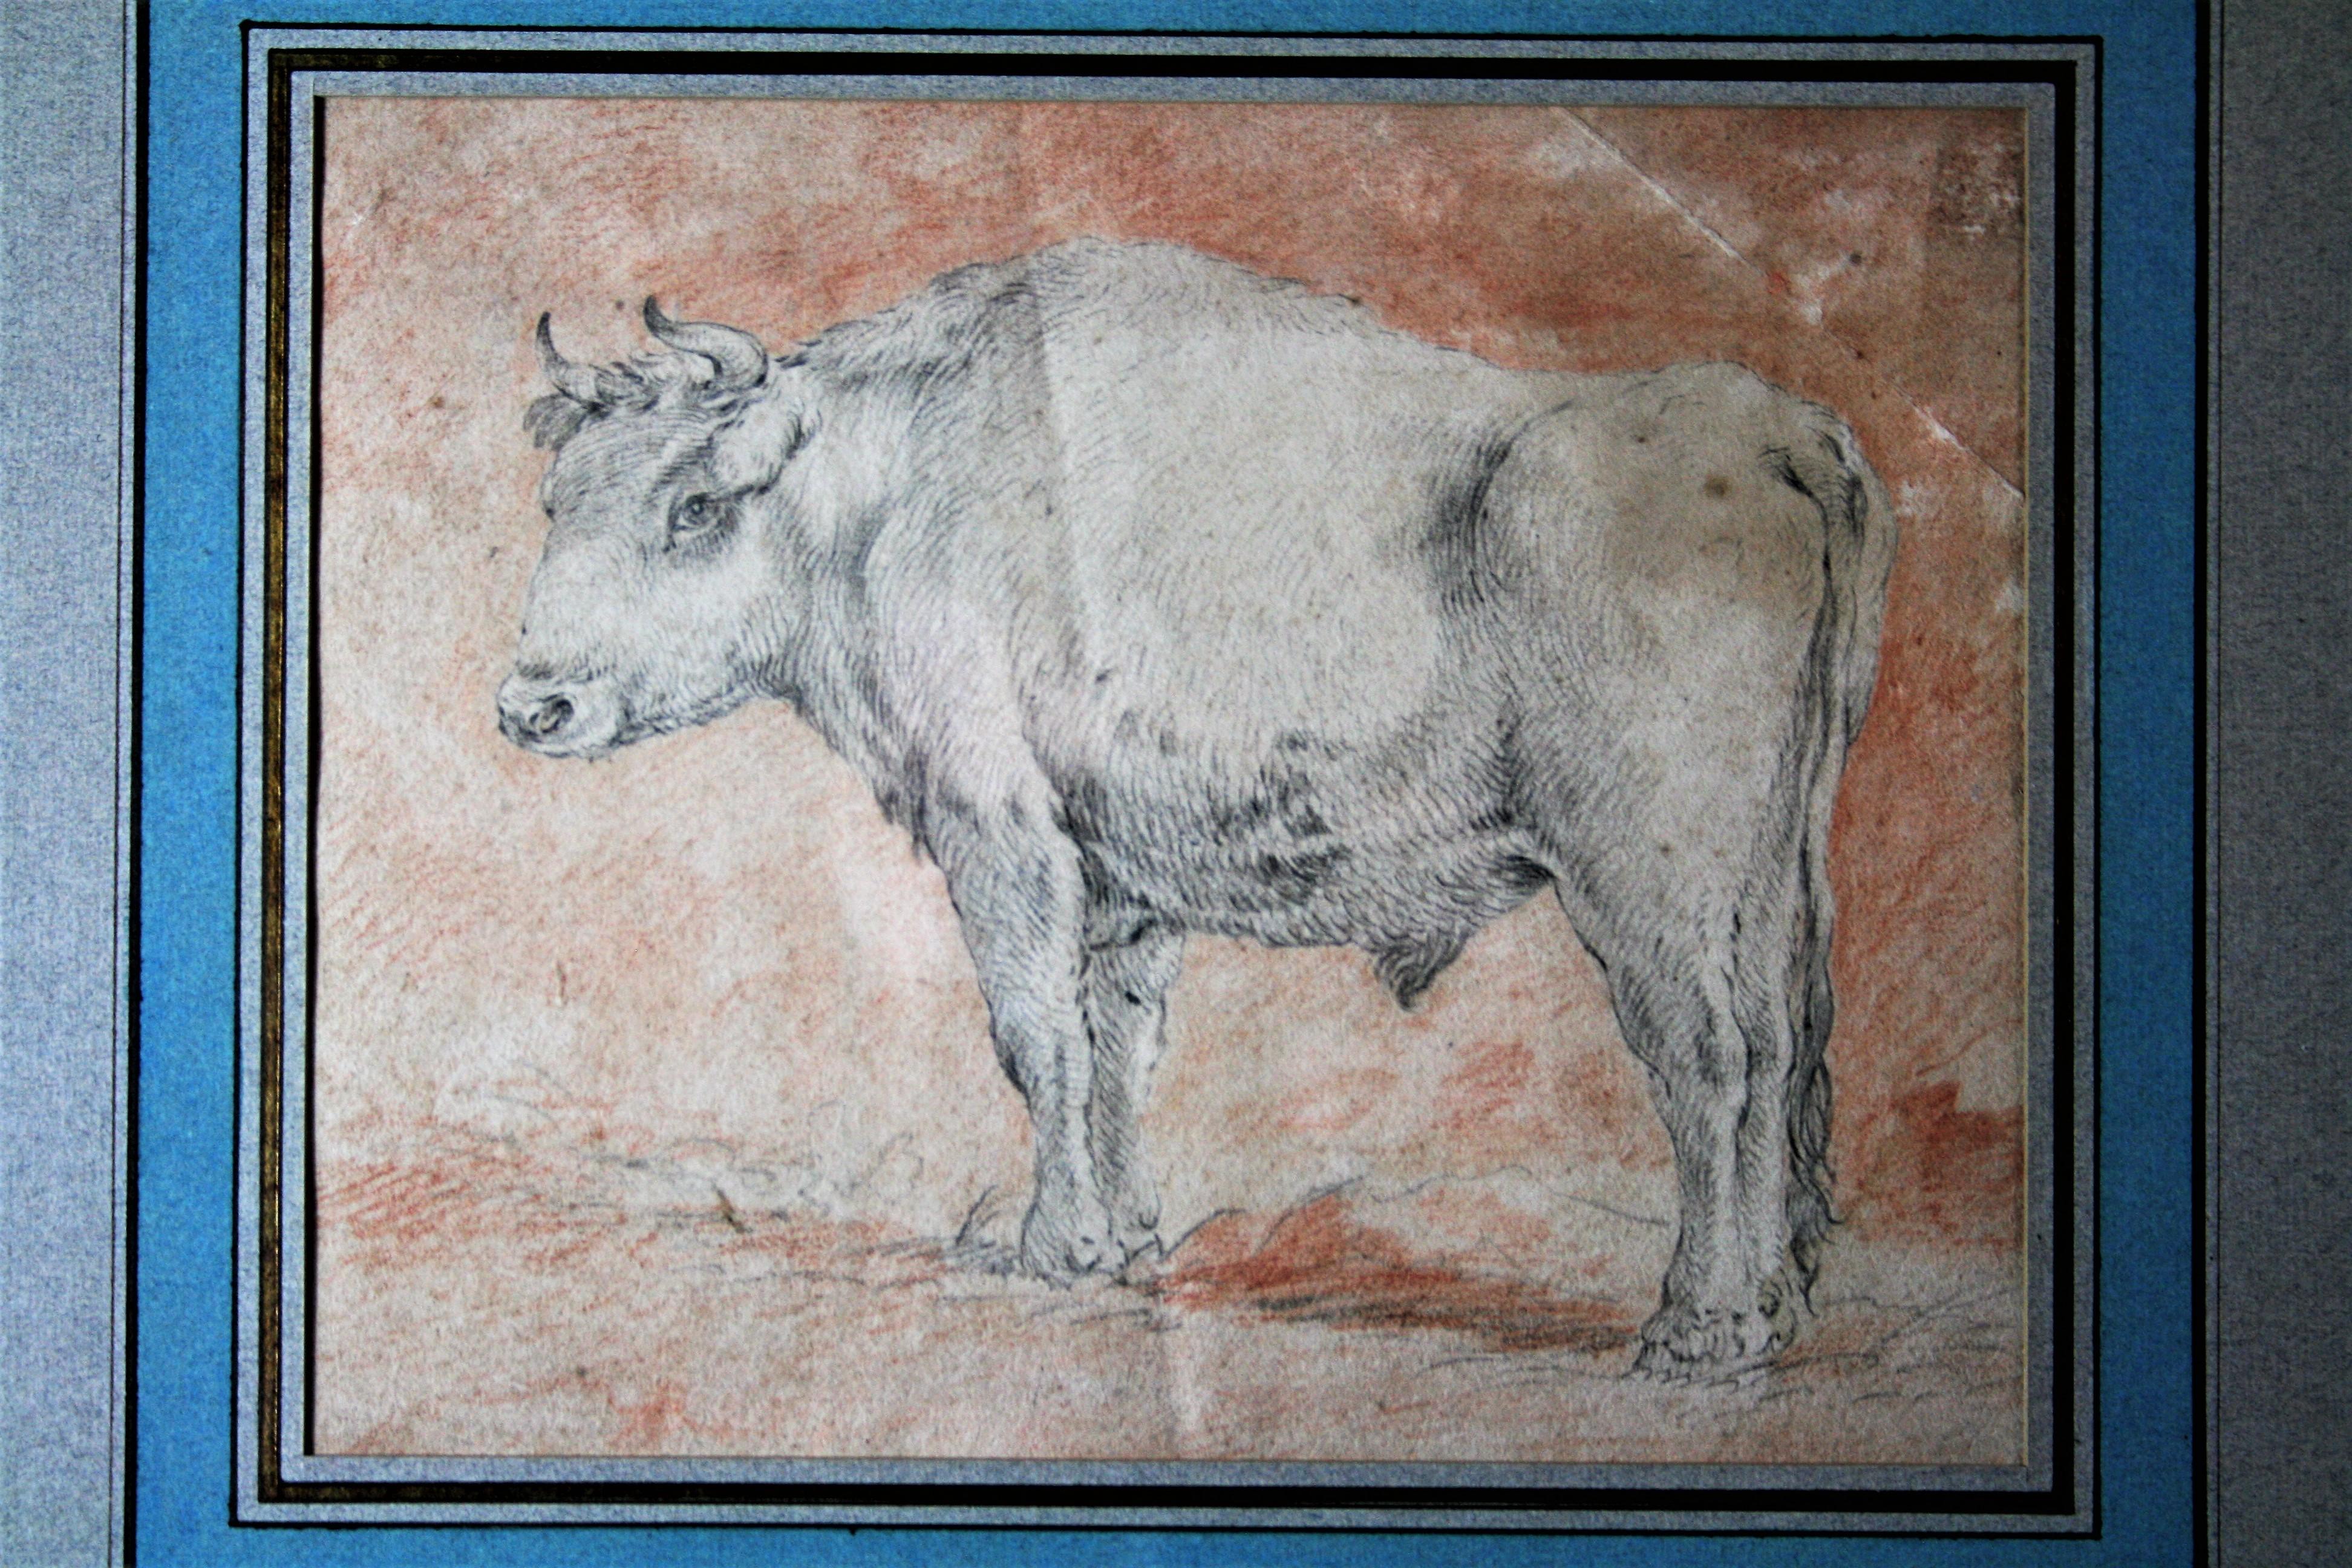 Beautiful Flemish drawing from the 17th century made with drypoint and red chalk representing a bull in profile. This naturalistic drawing takes up the favorite theme of the painter Paulus Potter, treated in the manner of this one with an important